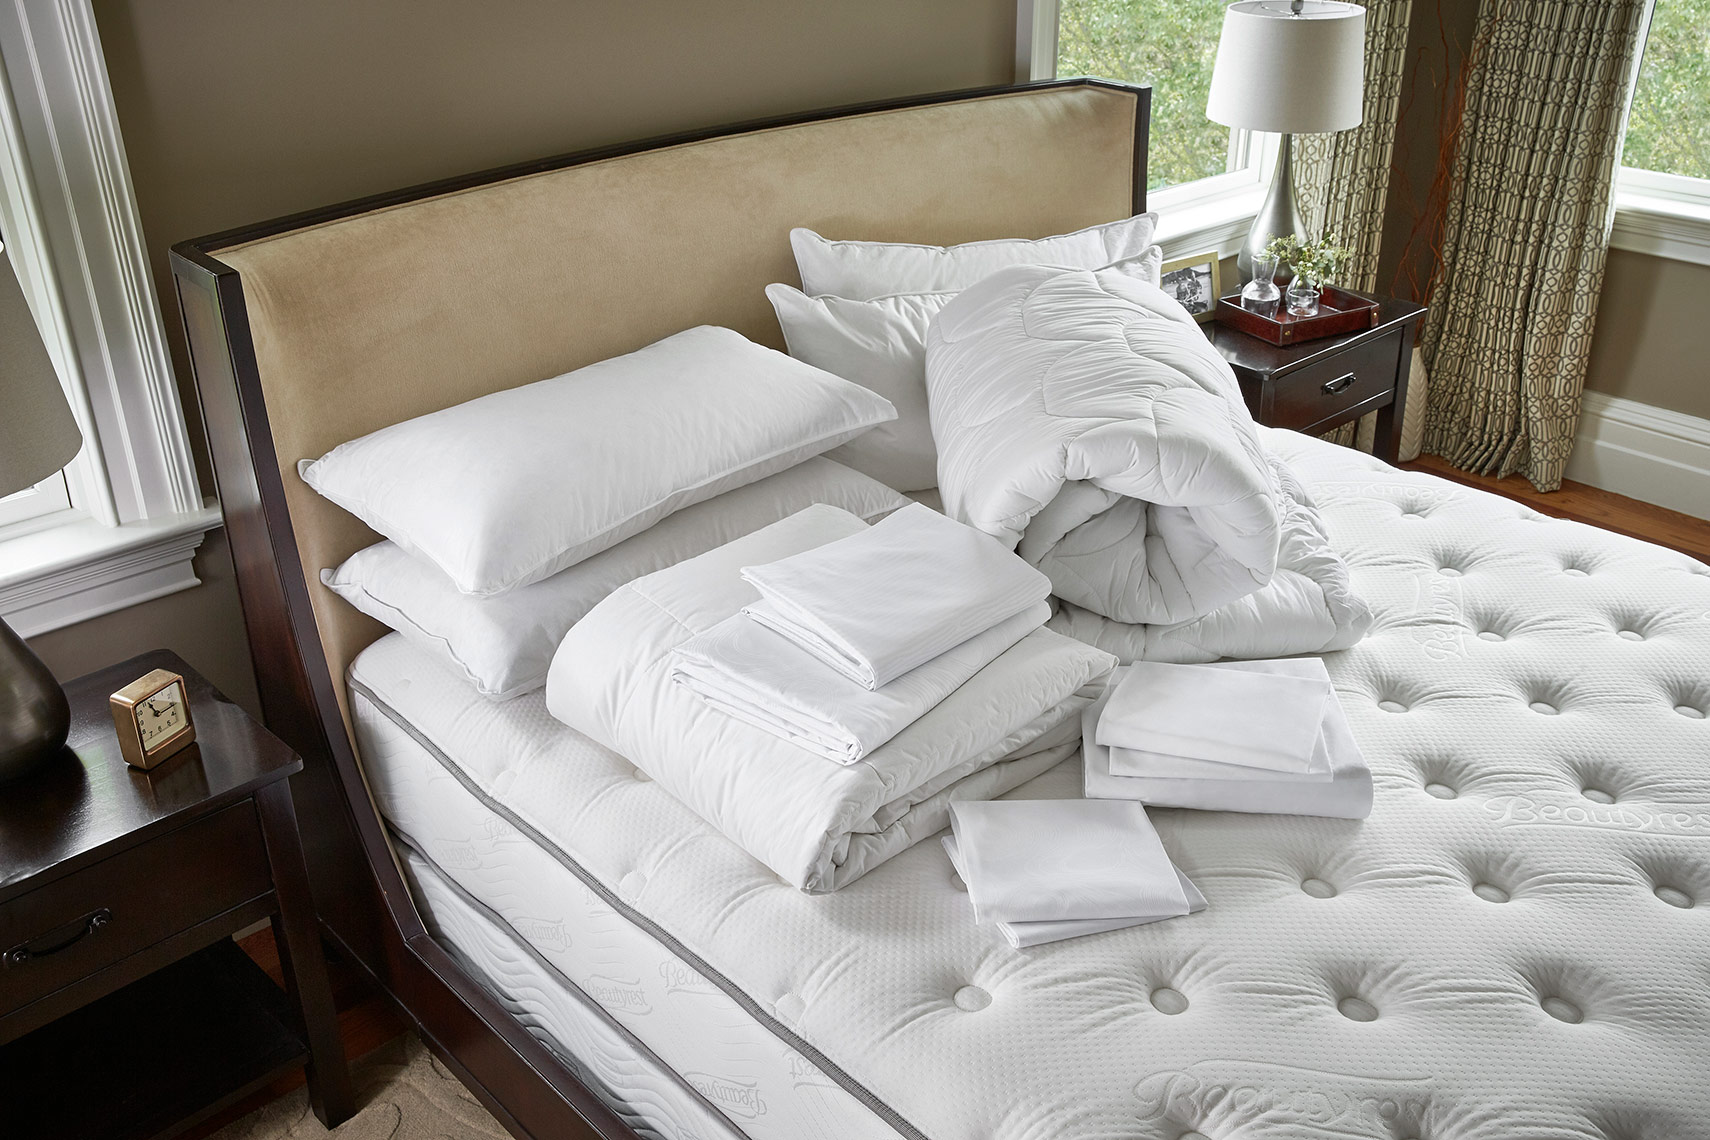 HOTELS-ShopJW28-Geo-Bed-and-Bedding-Set-Raw